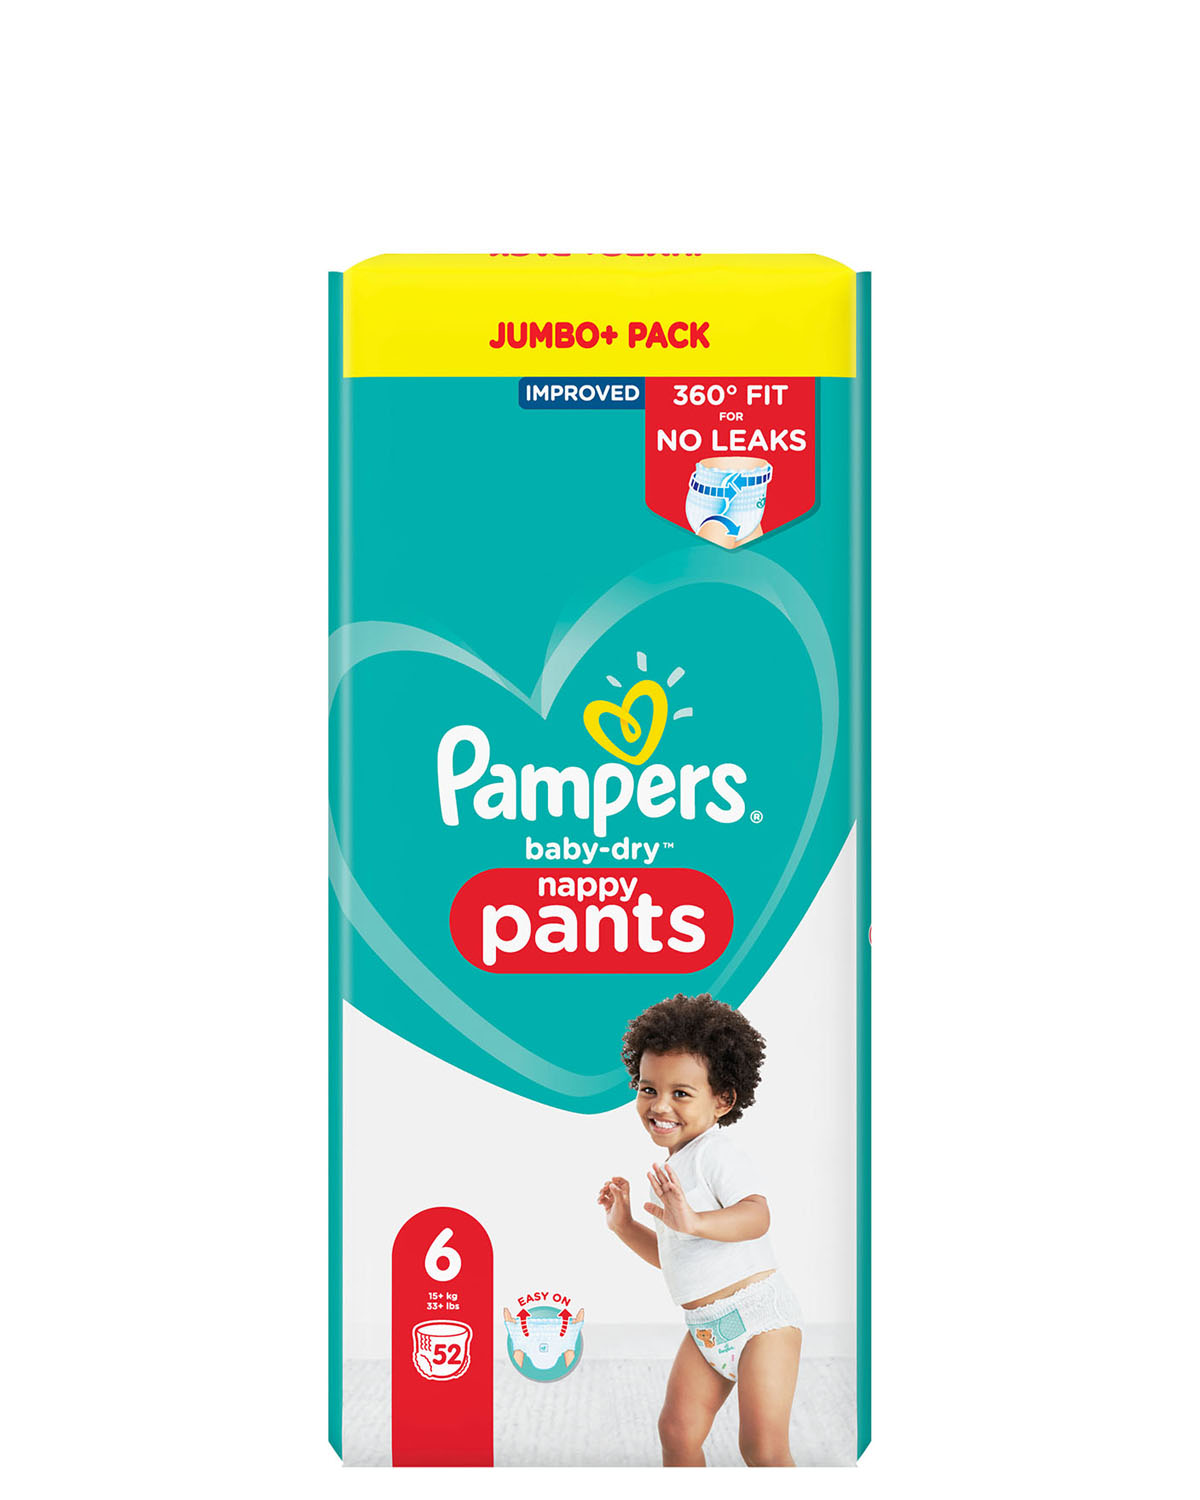 Pampers Baby-Dry Nappy Pants Size 4, 41 Count : Amazon.com.au: Baby